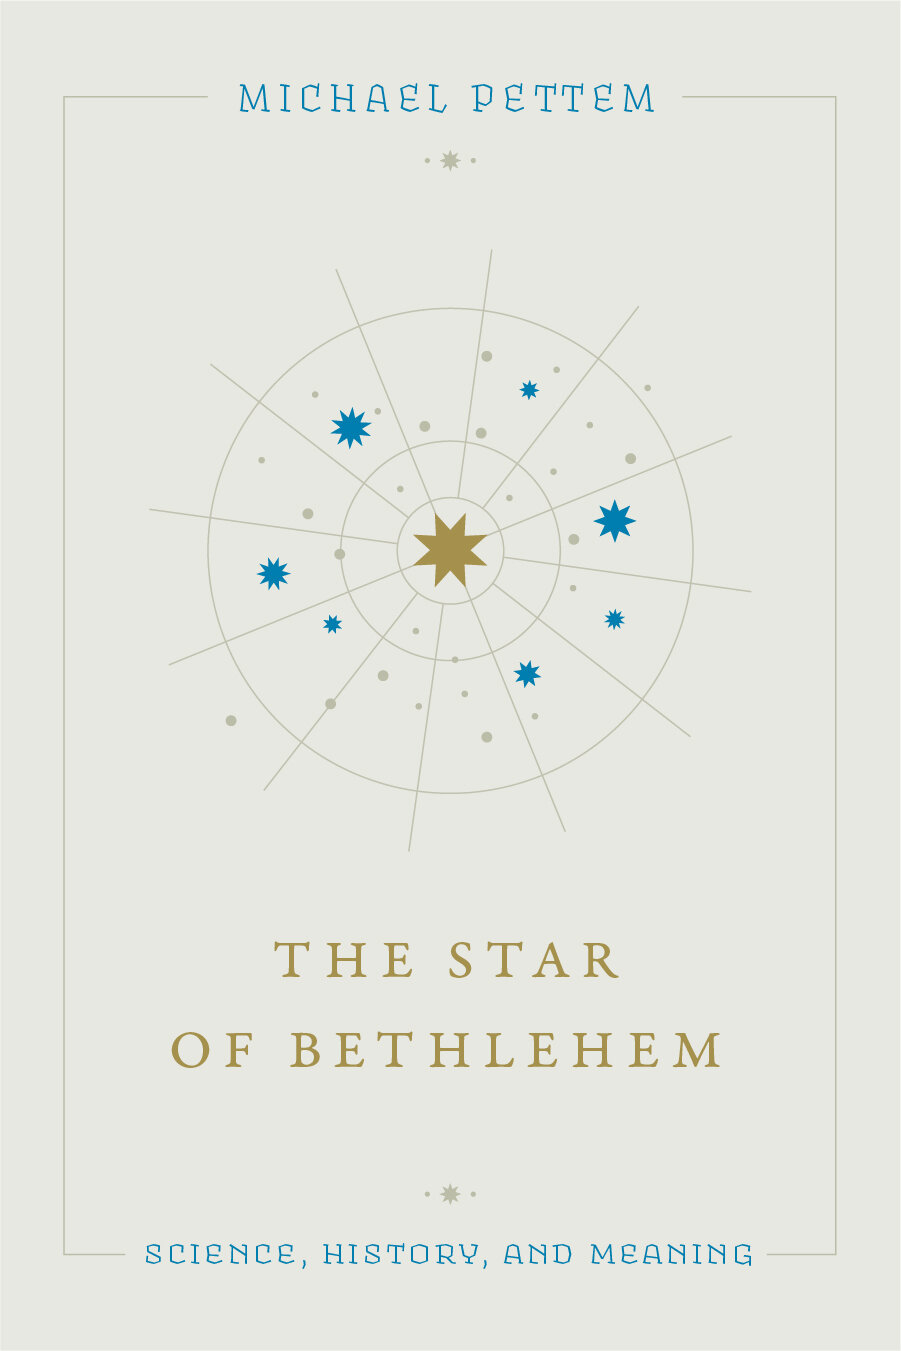 The Star of Bethlehem: Science, History, and Meaning